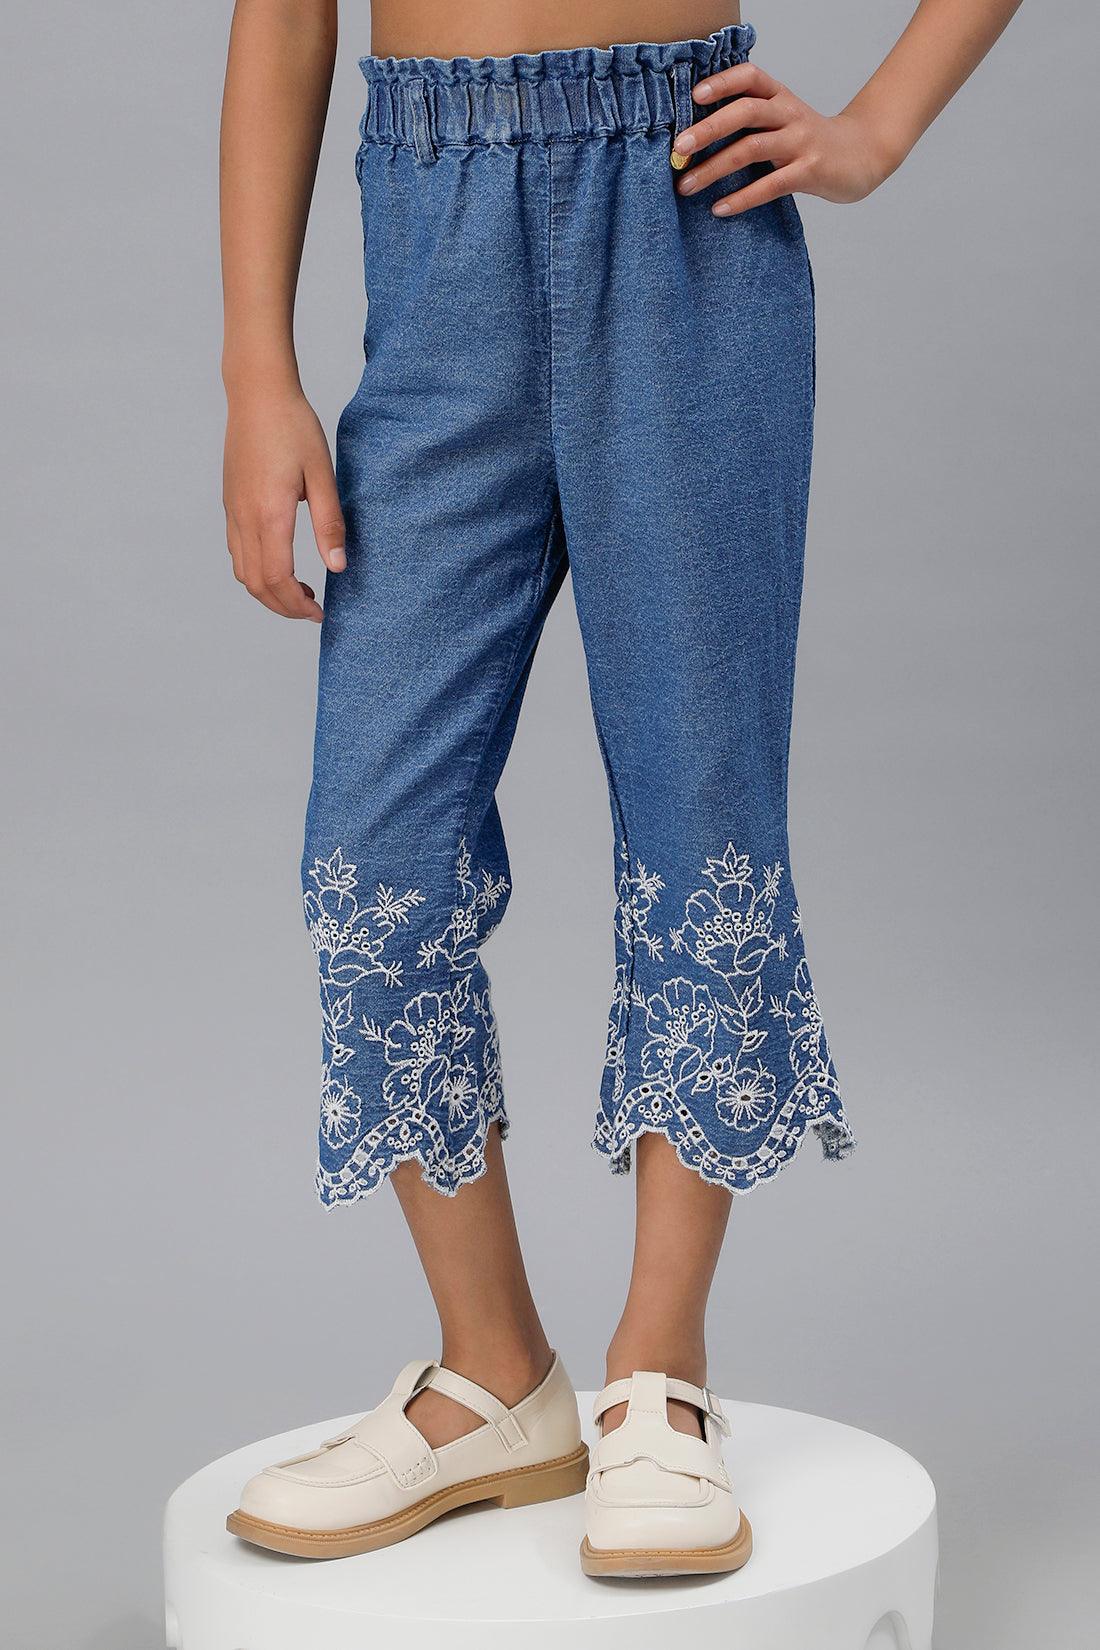 One Friday Girls Cotton Embroidered Capri Pant